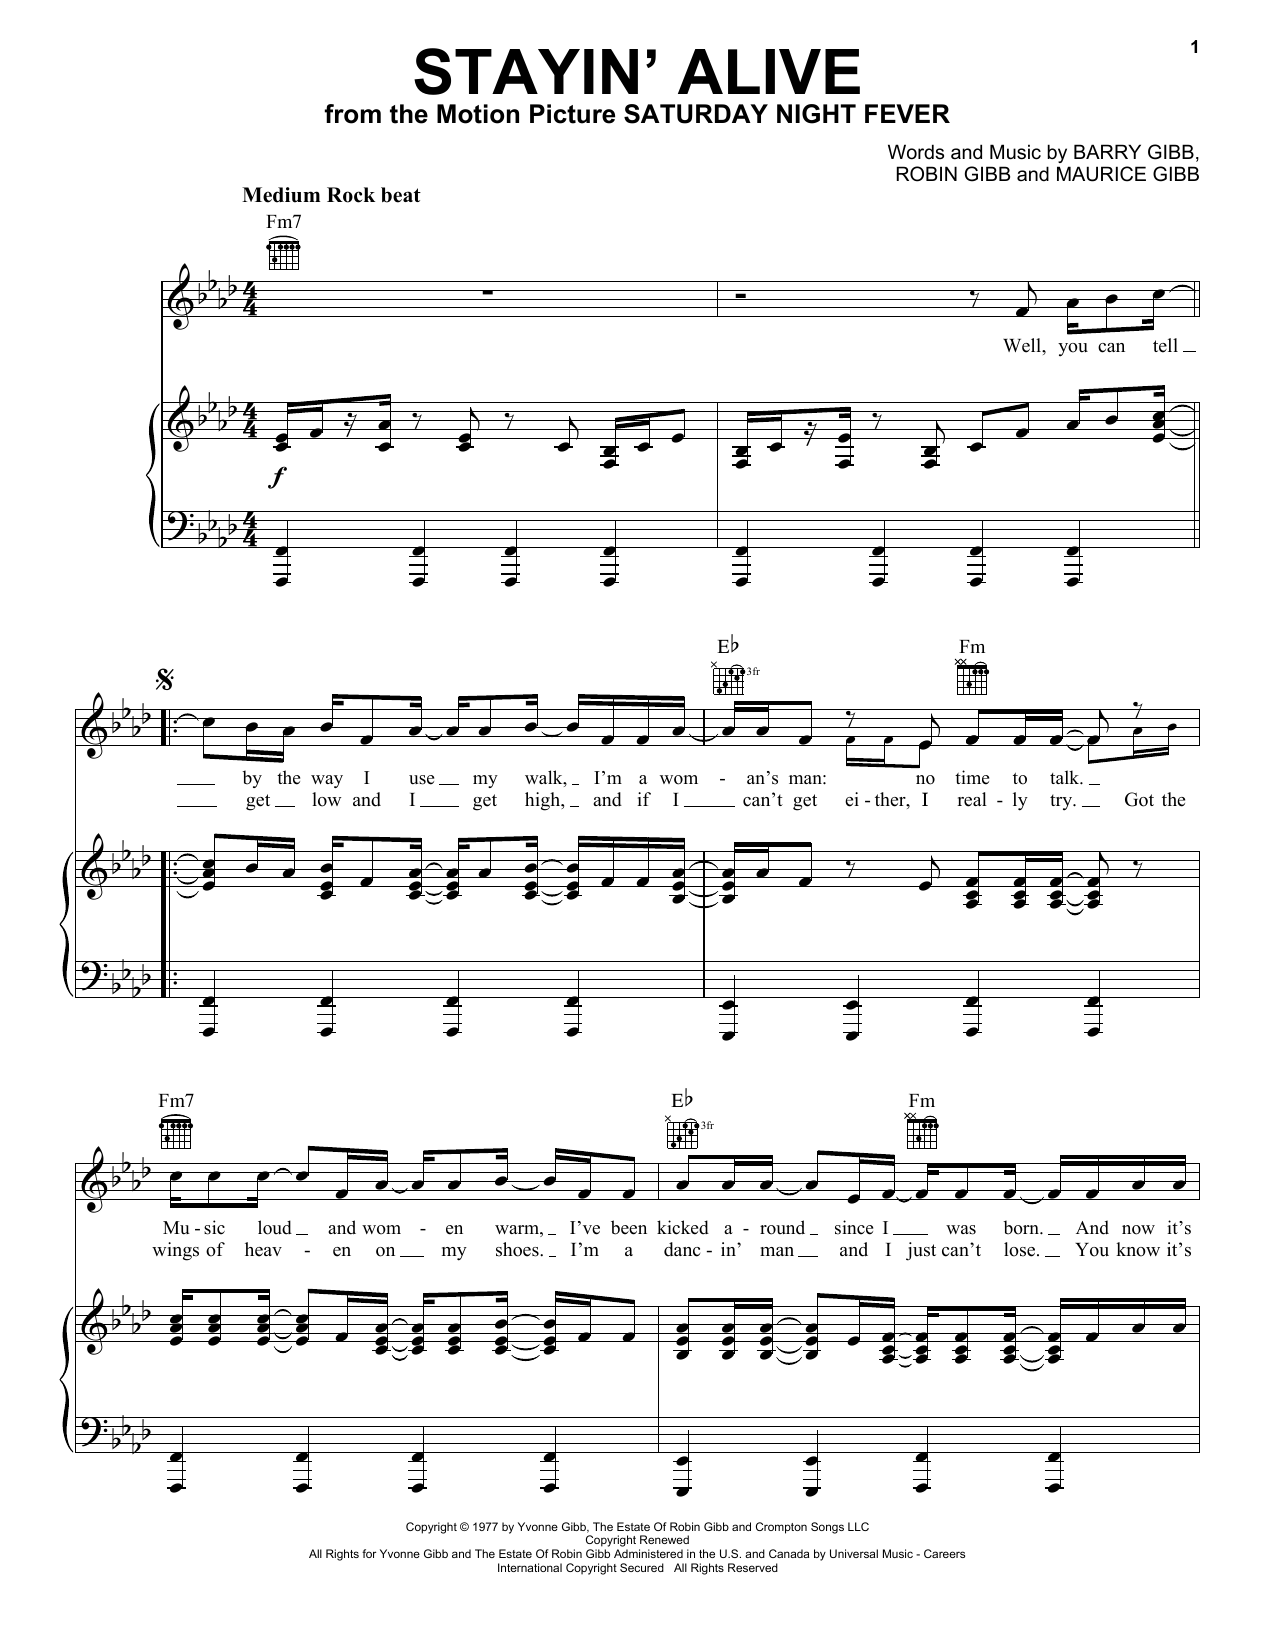 Bee Gees Stayin' Alive sheet music notes and chords. Download Printable PDF.